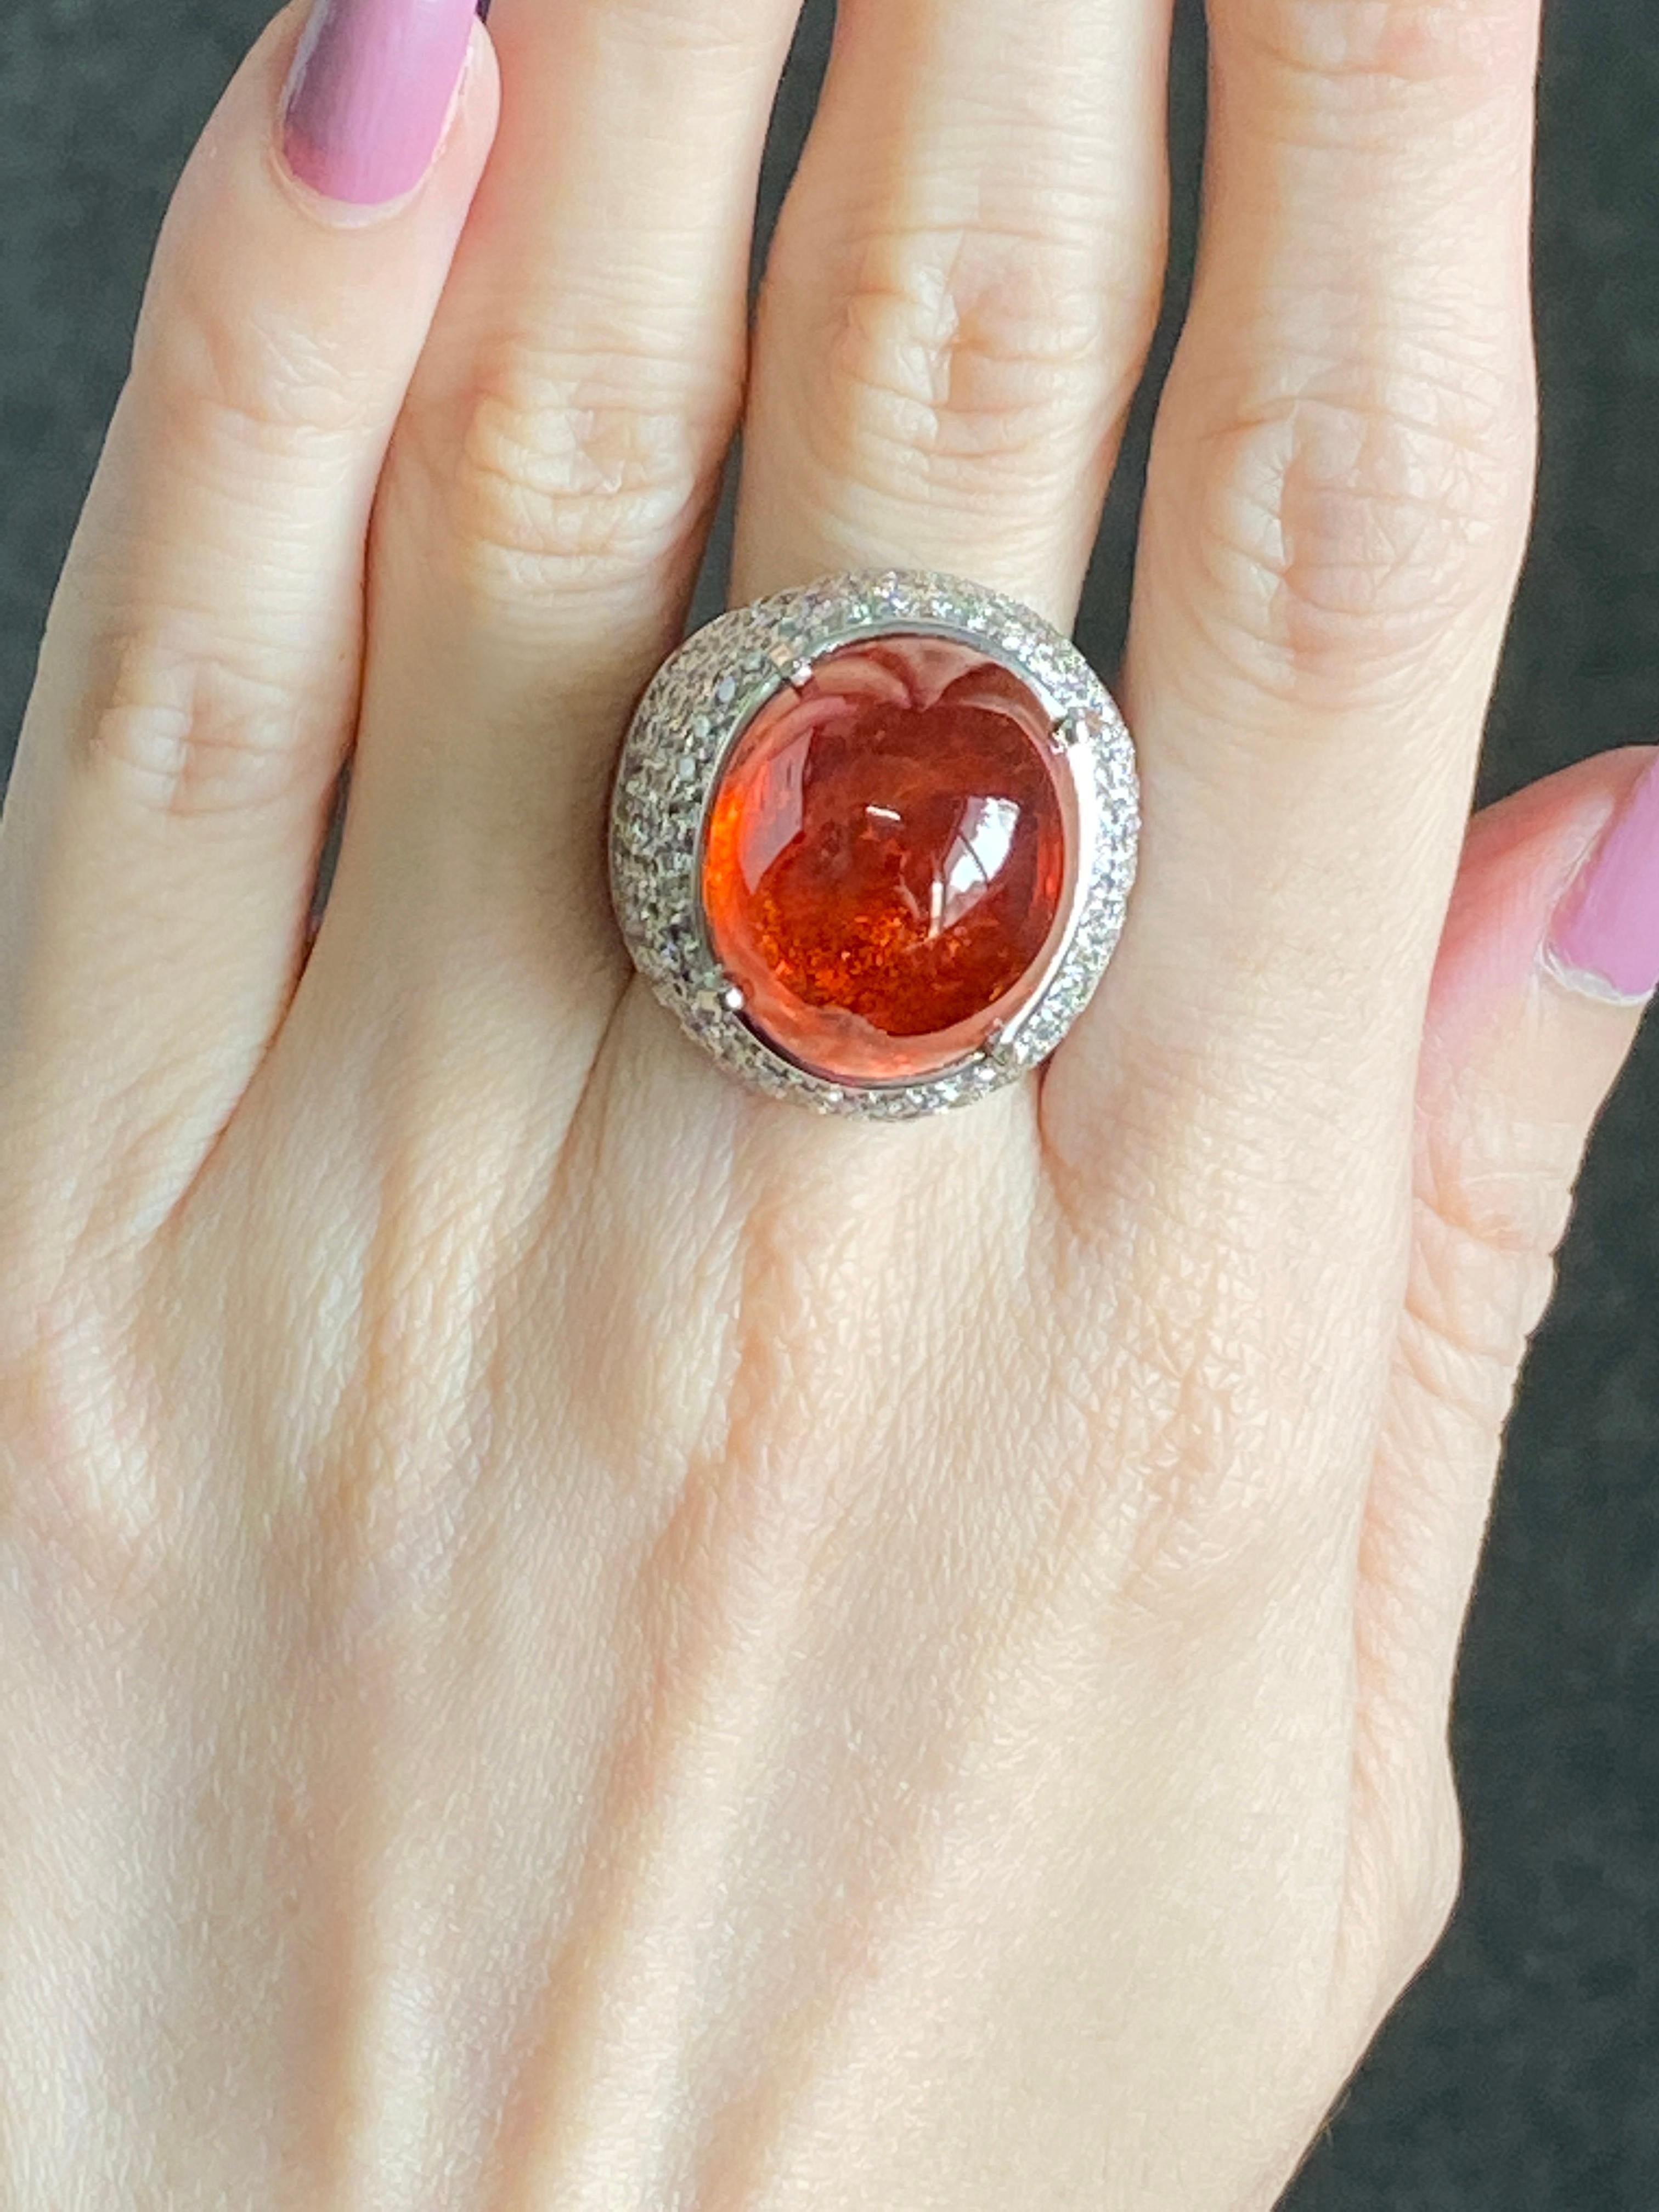 Mandarin Garnet Spessatite Cabochon Cocktail Ring With Diamonds And 18K Gold  For Sale 1